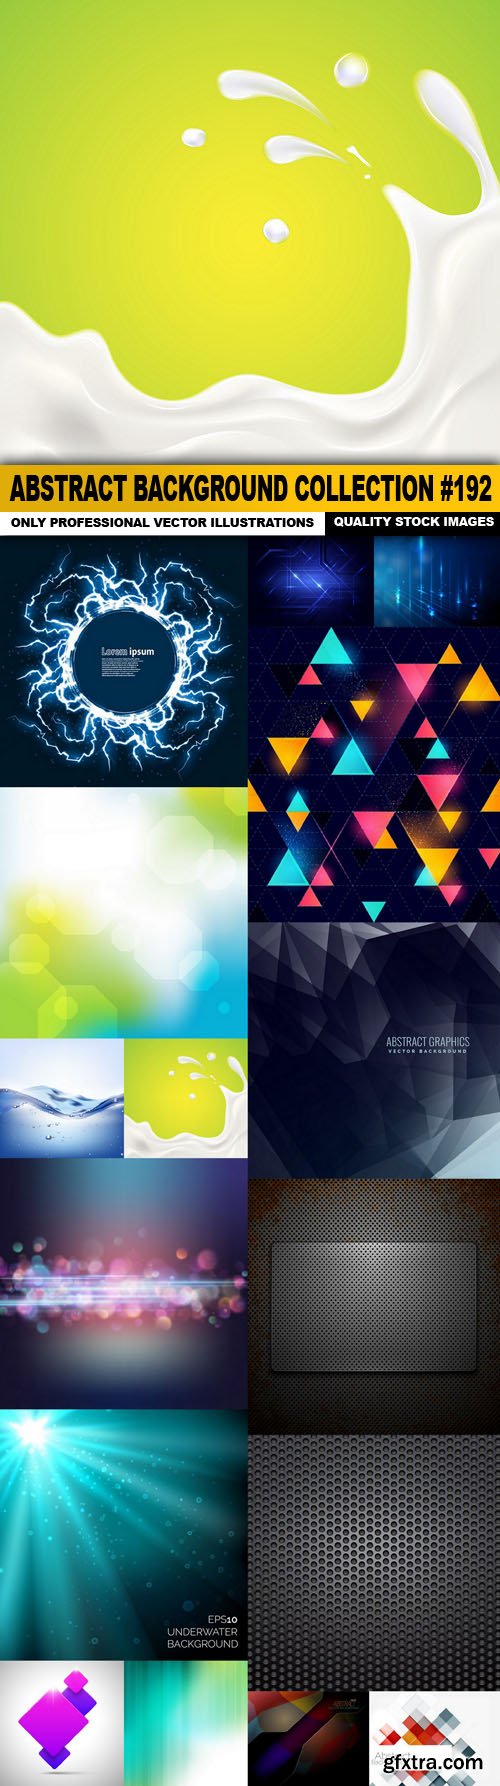 Abstract Background Collection #192 - 16 Vector